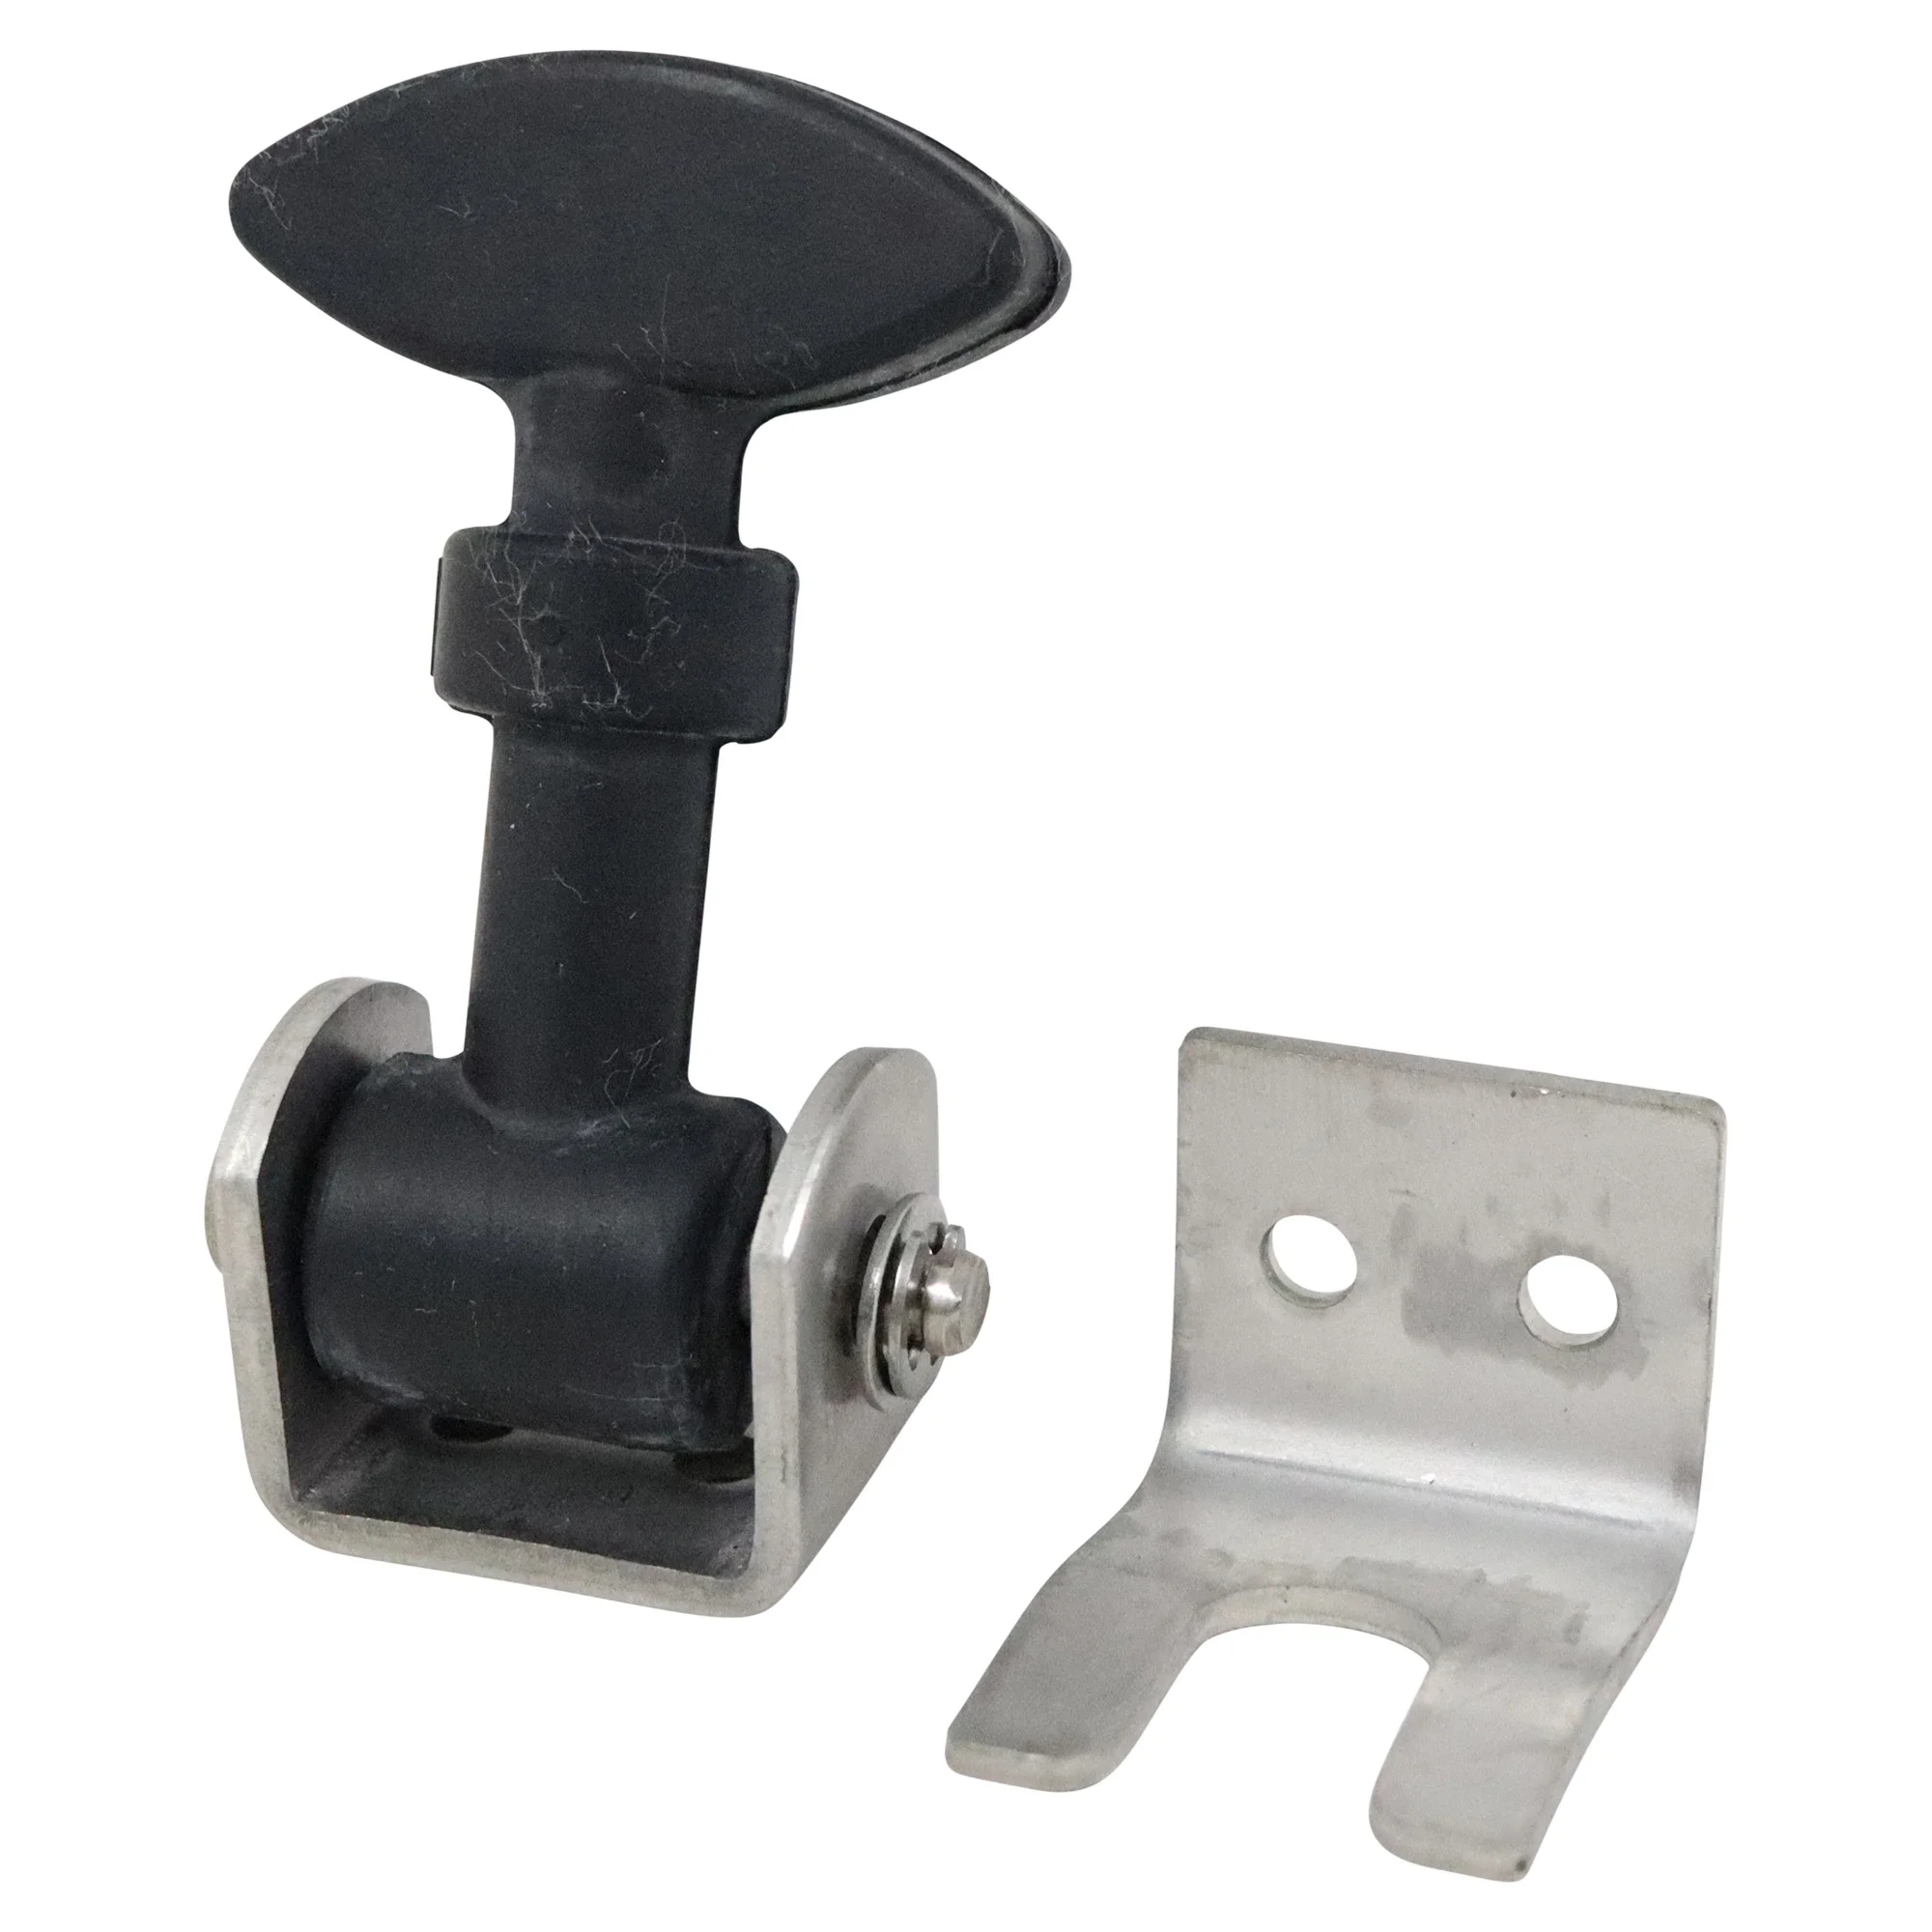 Wastebuilt® Replacement for McNeilus Latch